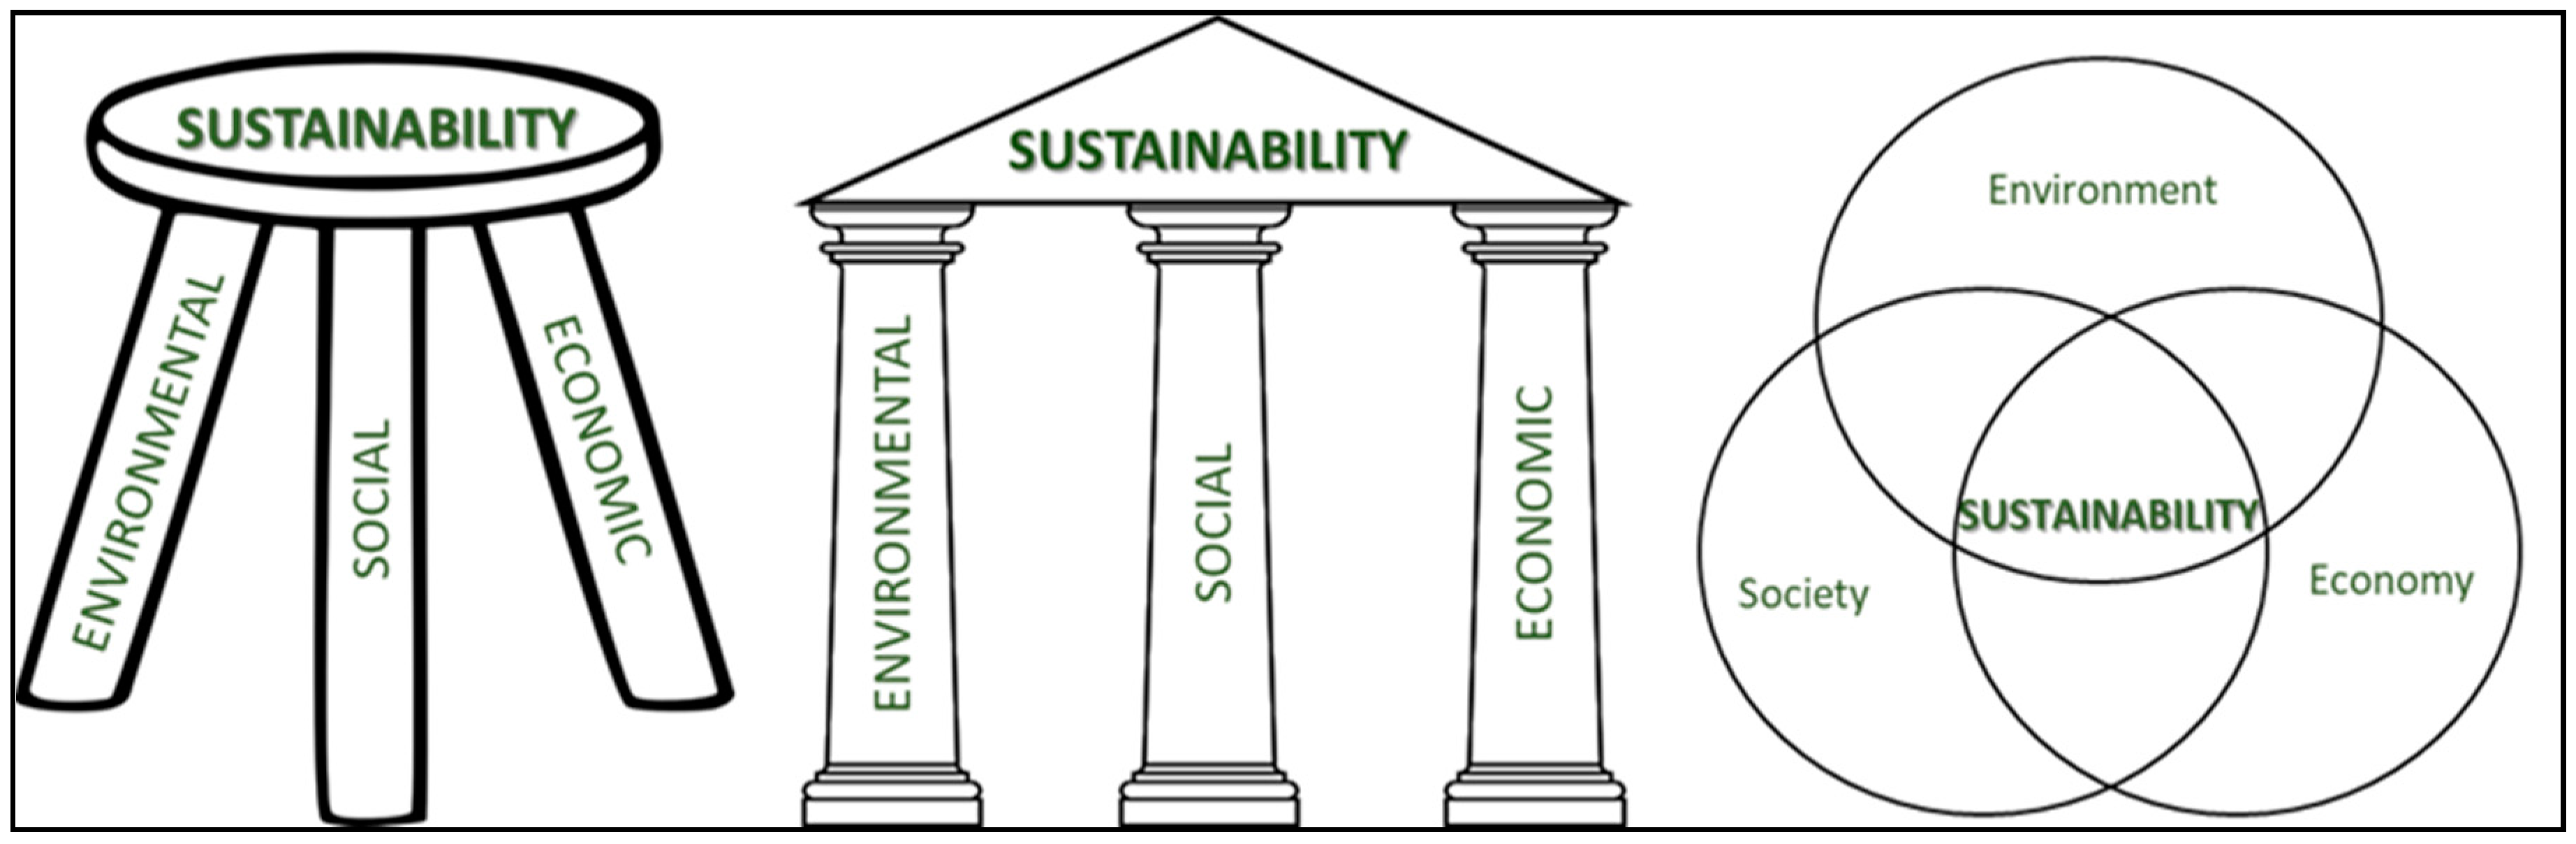 Sustainability | Free Full-Text | Urban Sustainability: From Theory  Influences to Practical Agendas